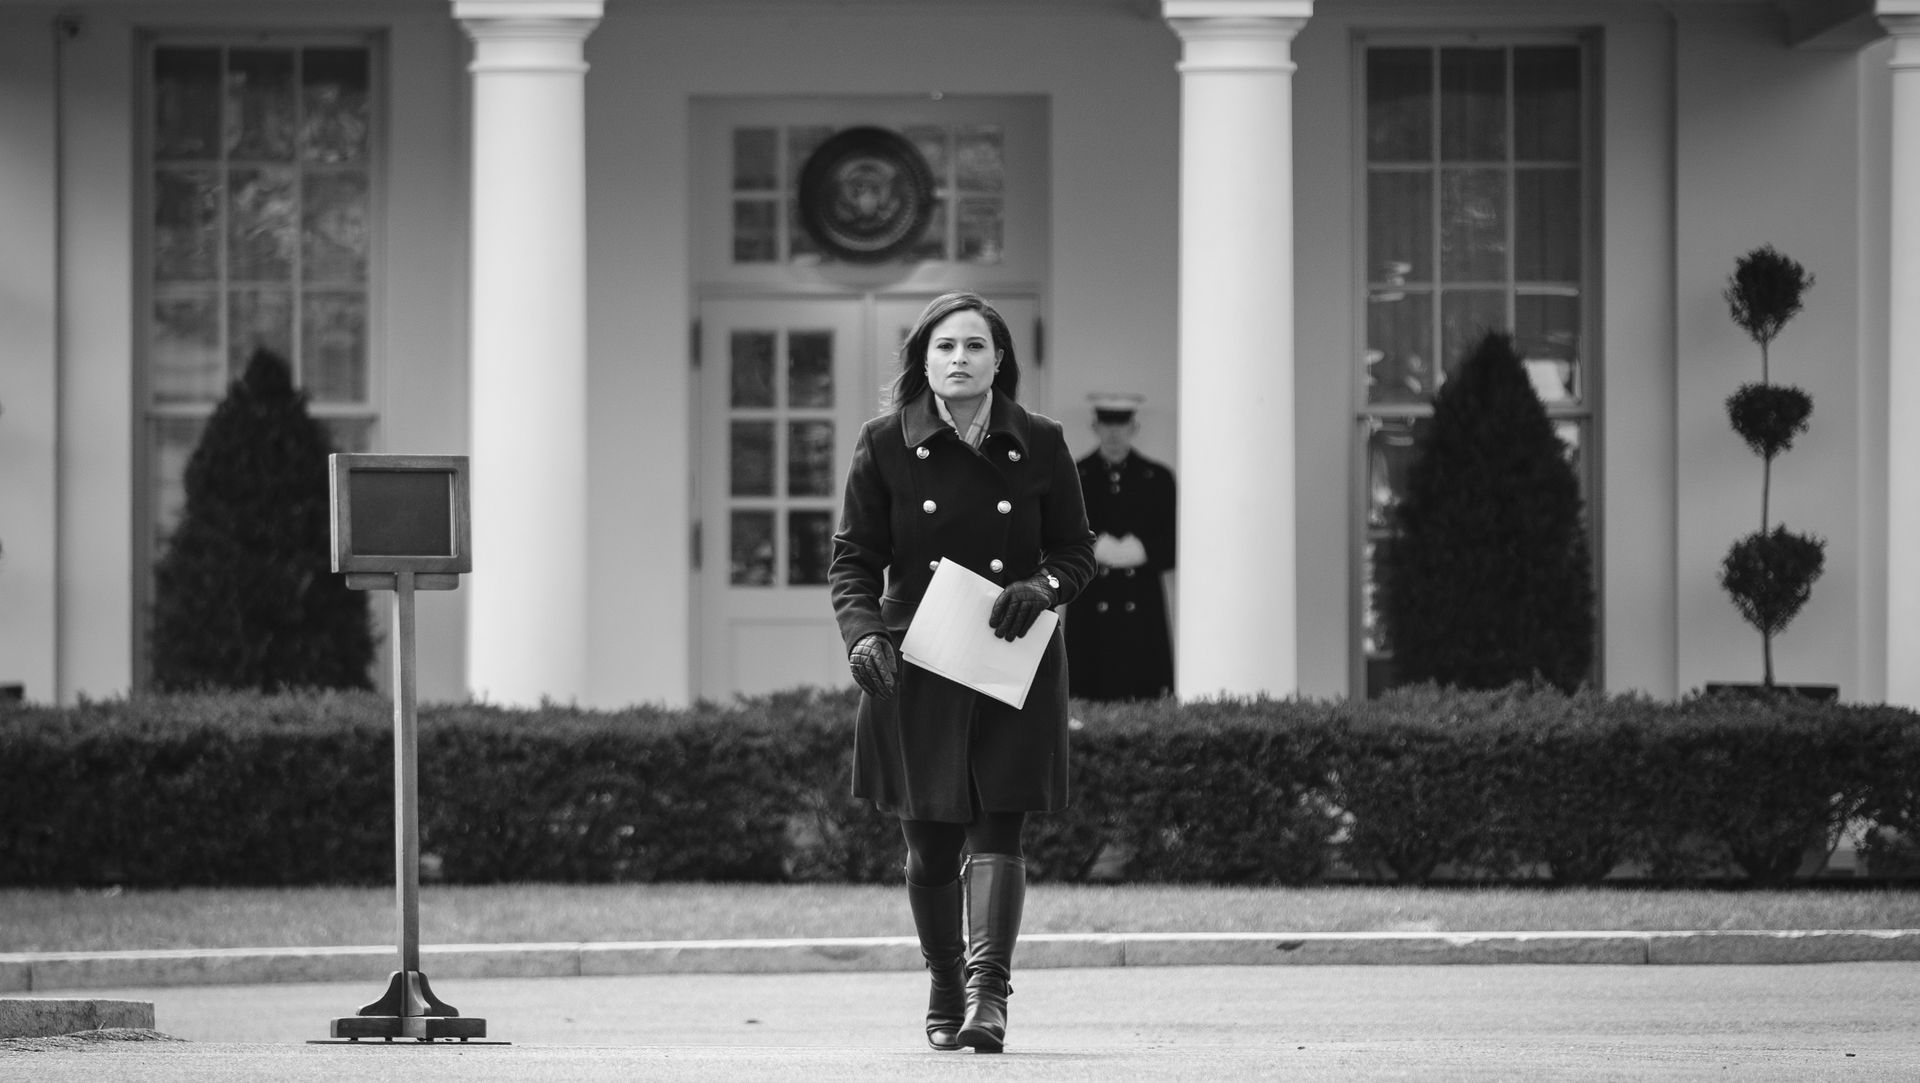 msnbc correspondent kristen welker reports from the white house in washington, dc on friday march 9, 2018 photographer christopher dilts  msnbc